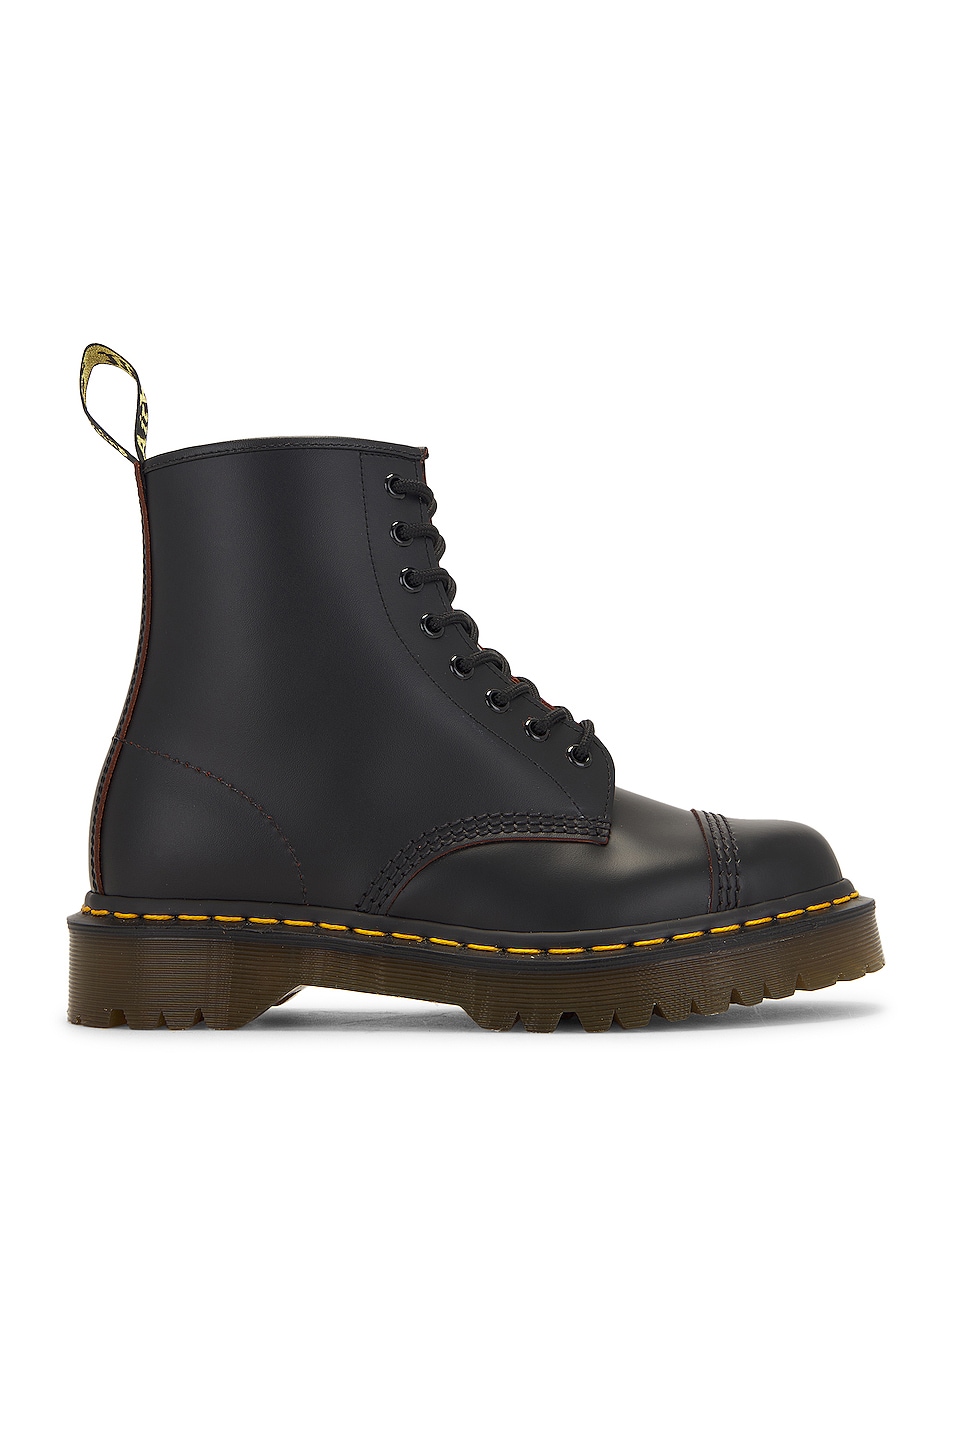 Image 1 of Dr. Martens Made in England 1460 Toe Cap Bex in Black